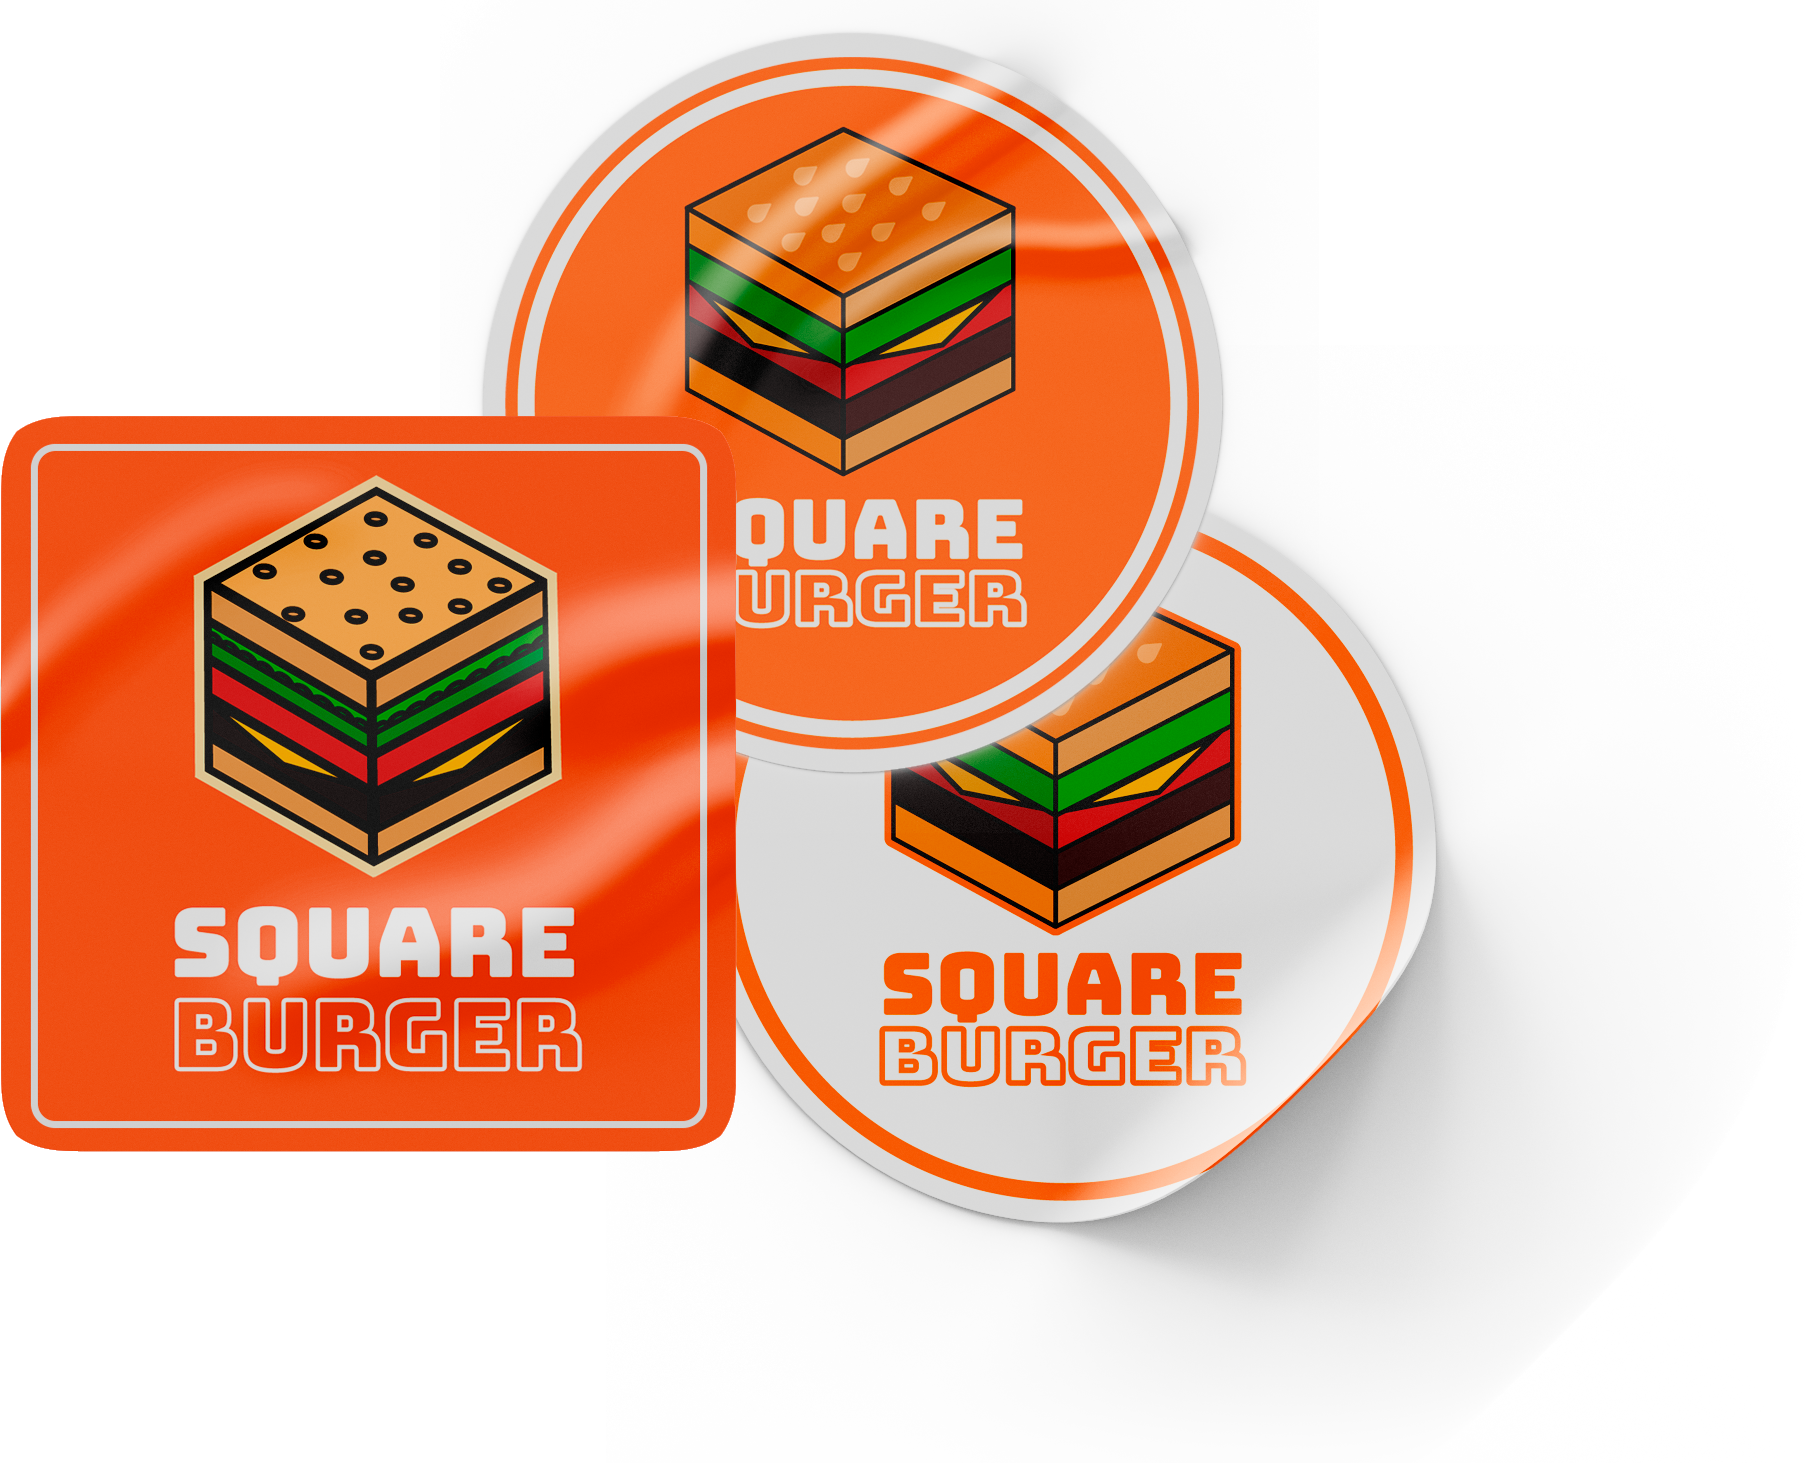 3 stickers with the Square Burger logo.